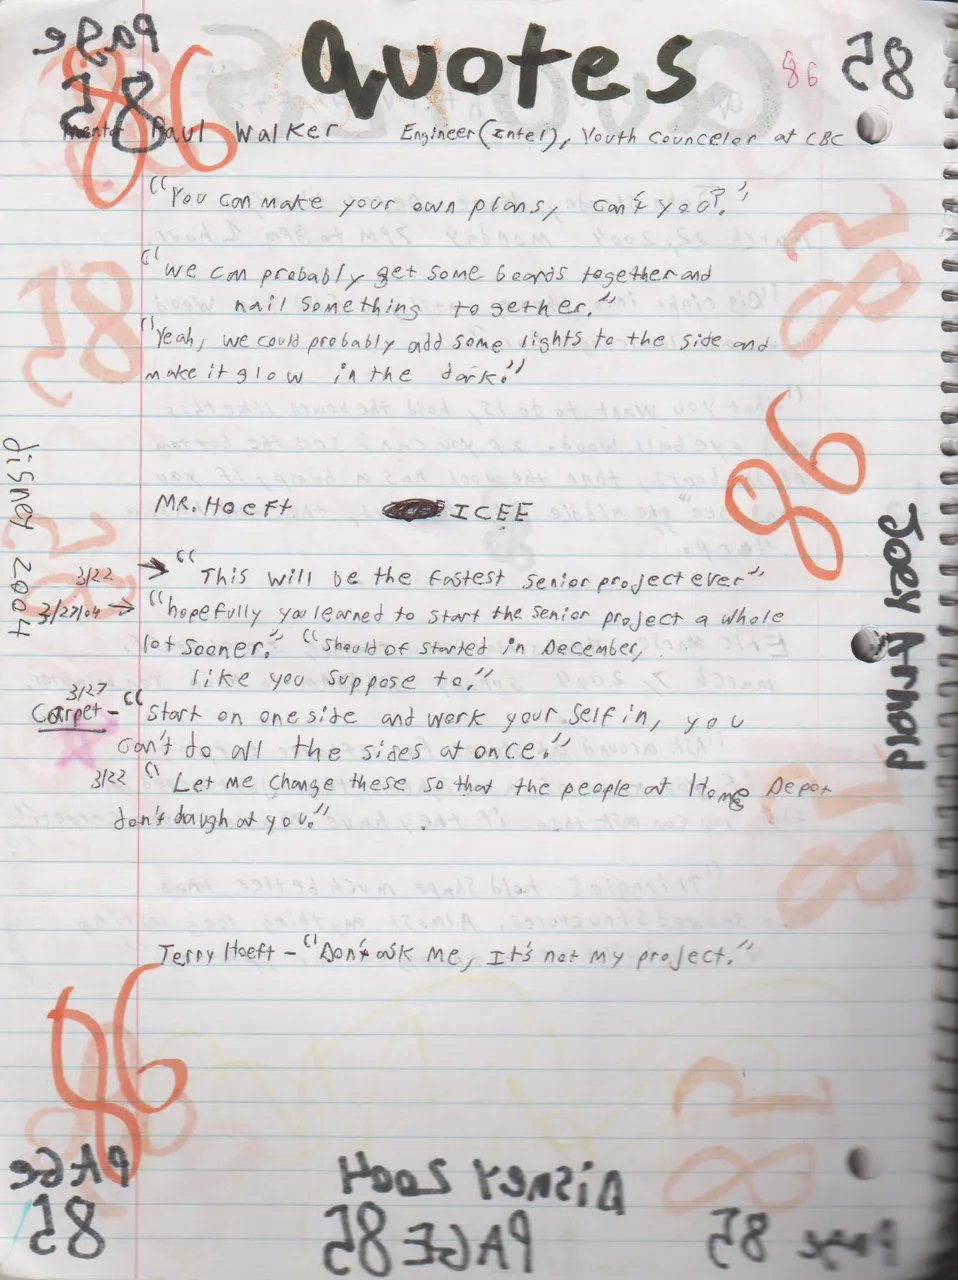 2004-01-29 - Thursday - Carpetball FGHS Senior Project Journal, Joey Arnold, Part 02, 96pages numbered, Notebook-84 ok.png